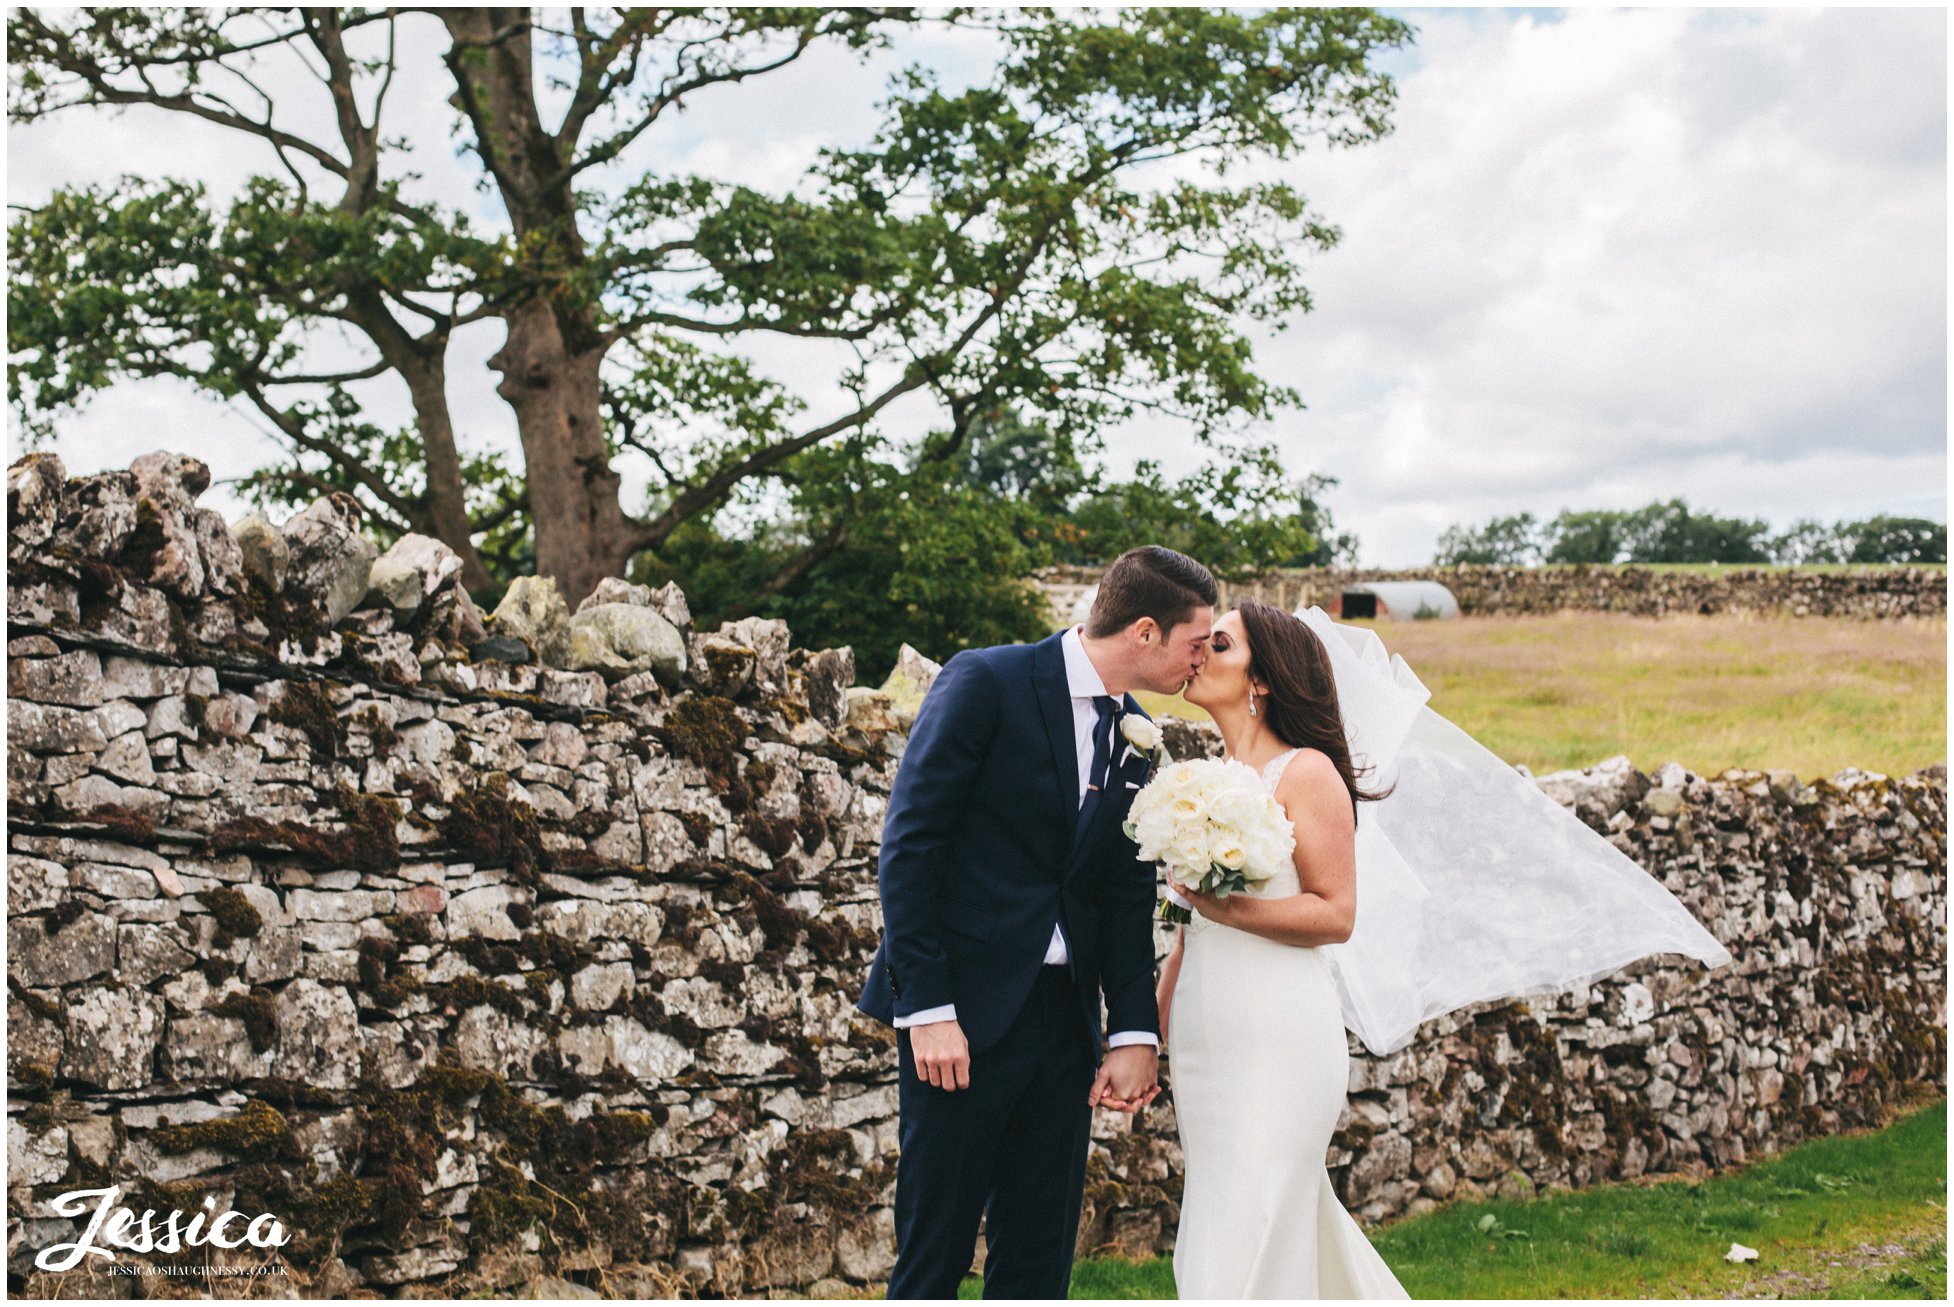 newly wed's share kiss in front of stone wall after their wedding at askham hall in the lake district